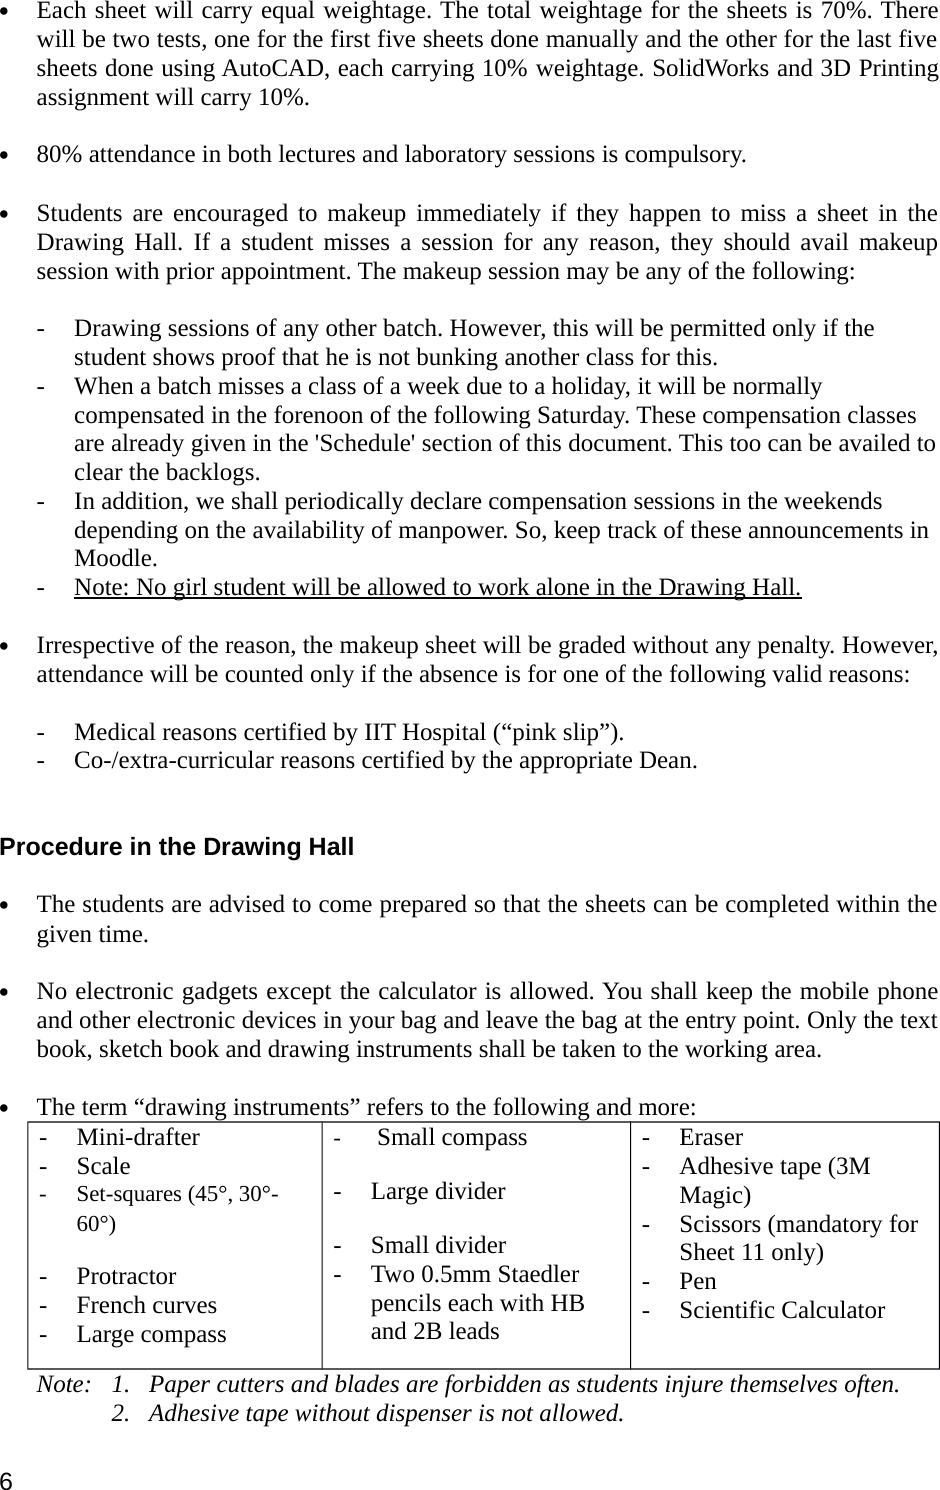 Page 6 of 8 - ME-119: ENGINEERING GRAPHICS AND DRAWING Sheet00-Instructions For Students-20140825